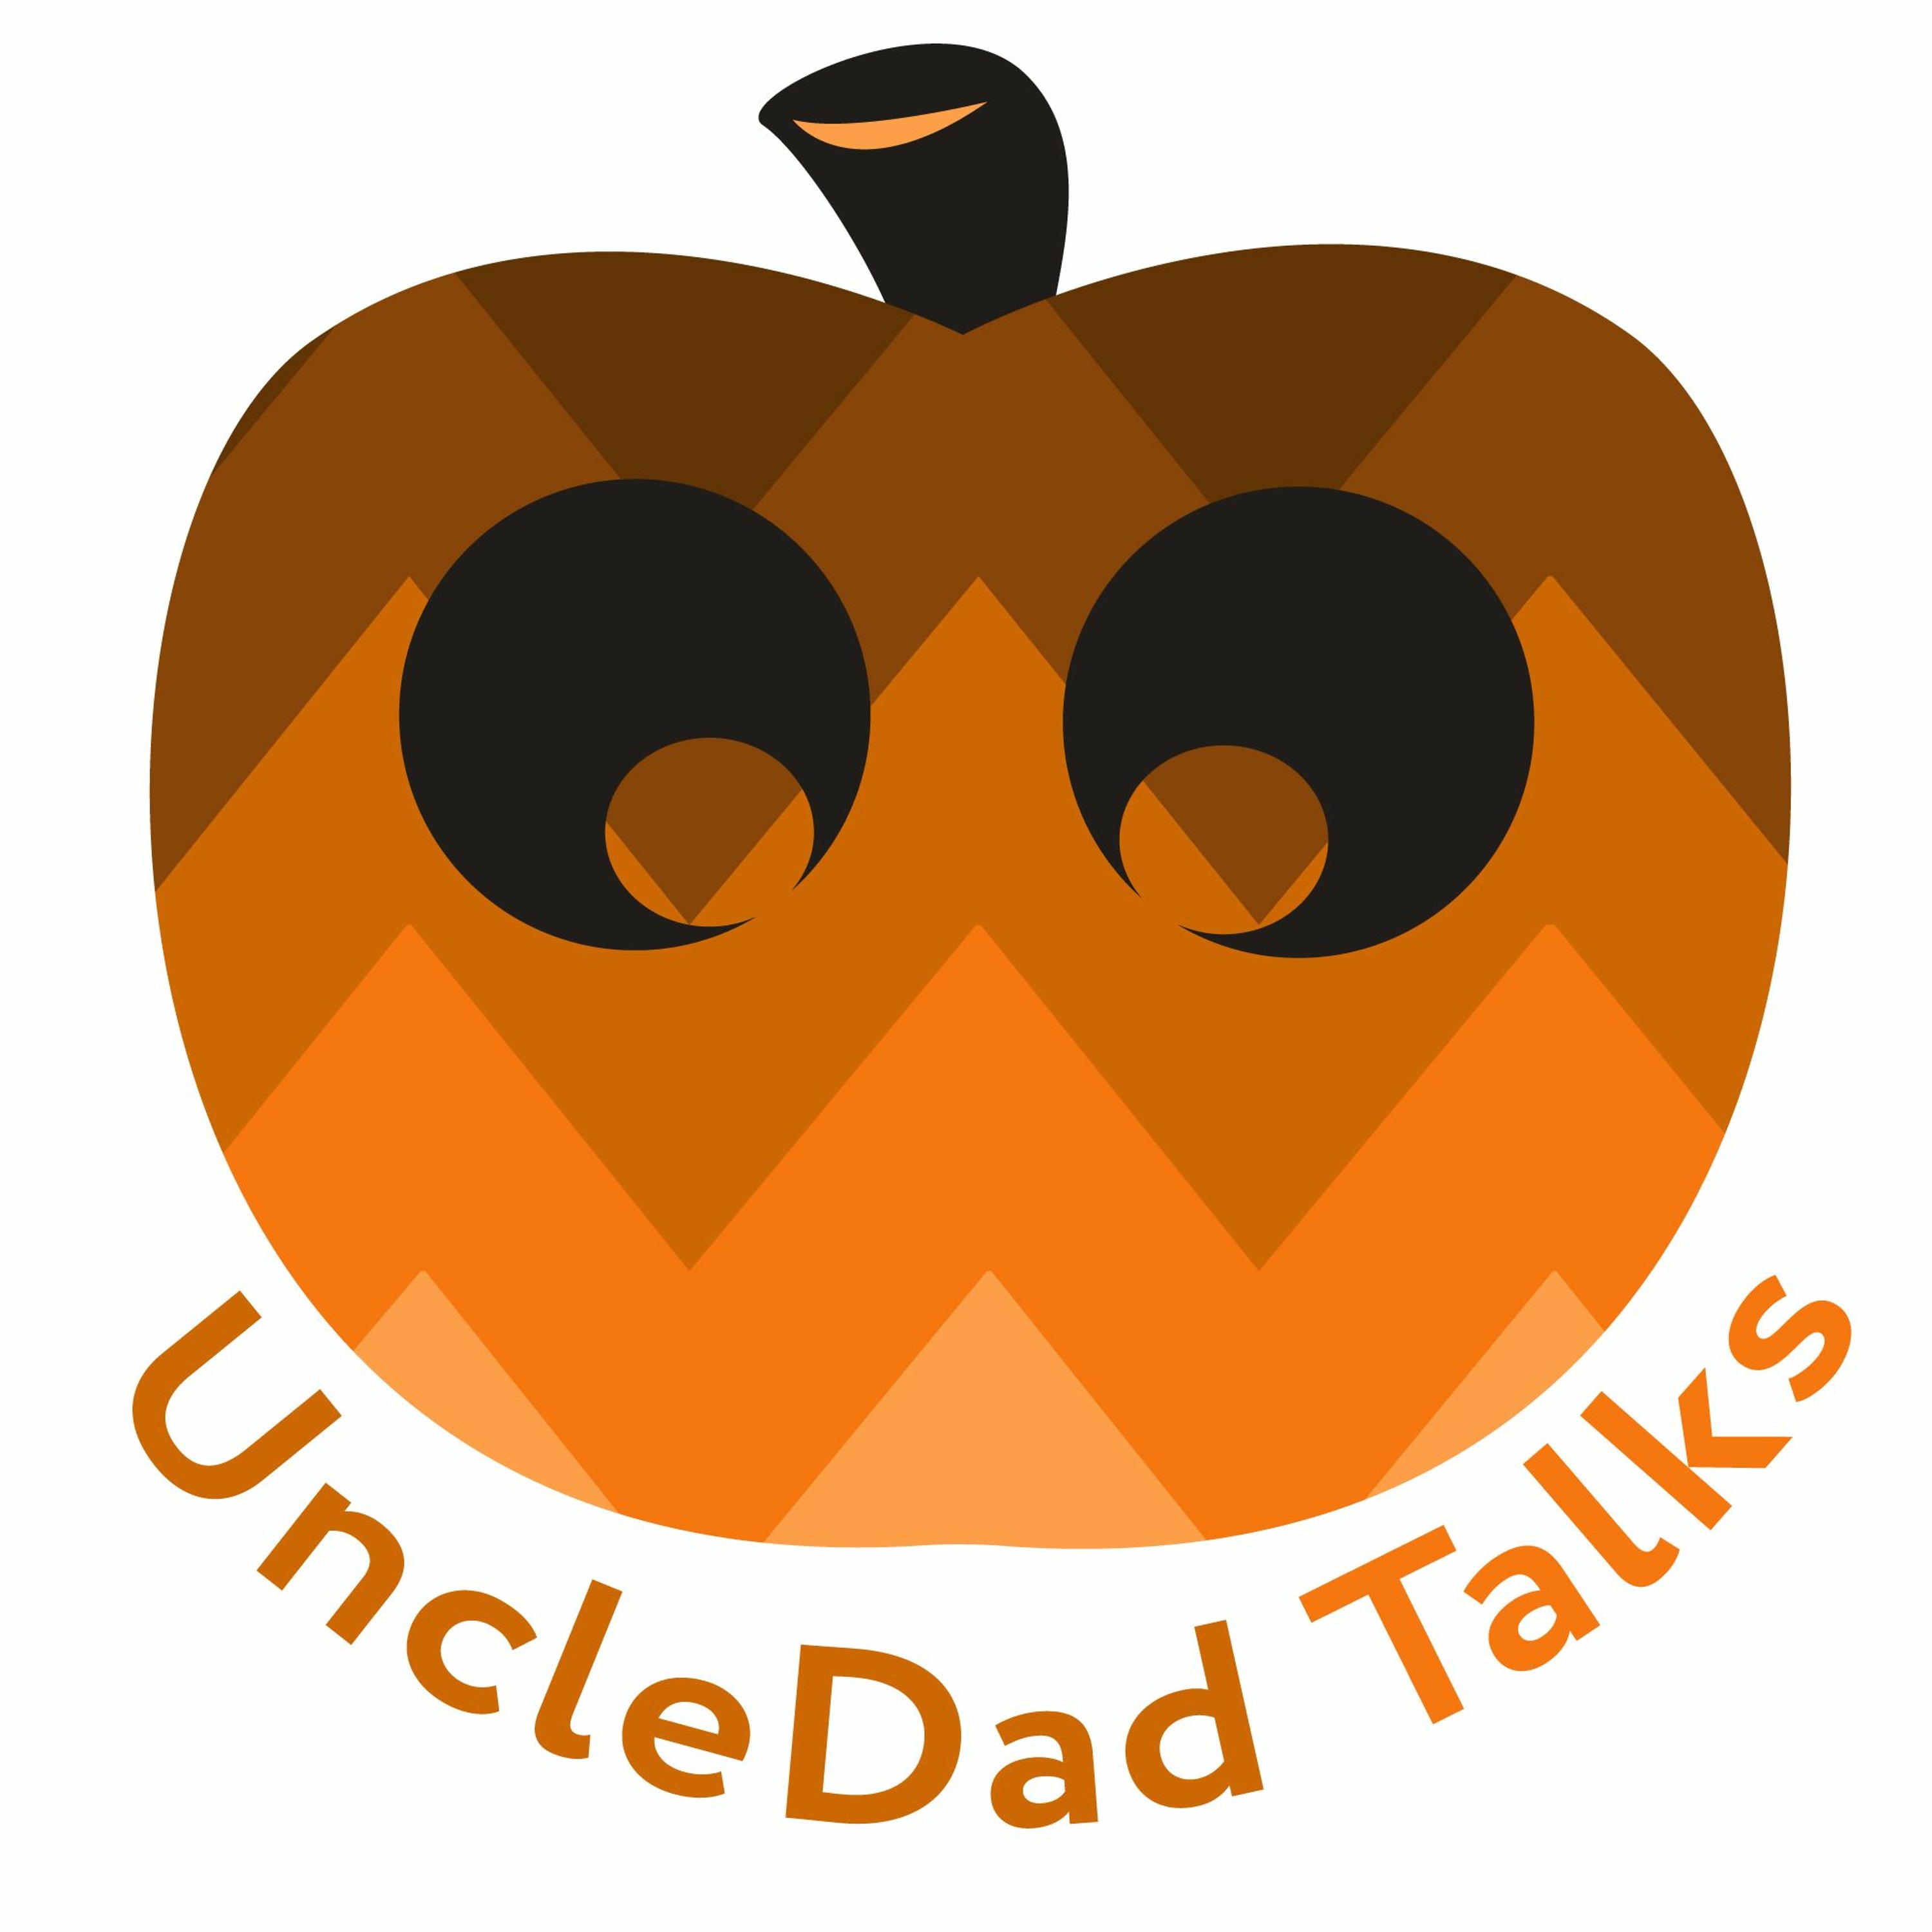 UncleDad's Halloween Bash 2022 featuring Emonic and Mike Vaughn